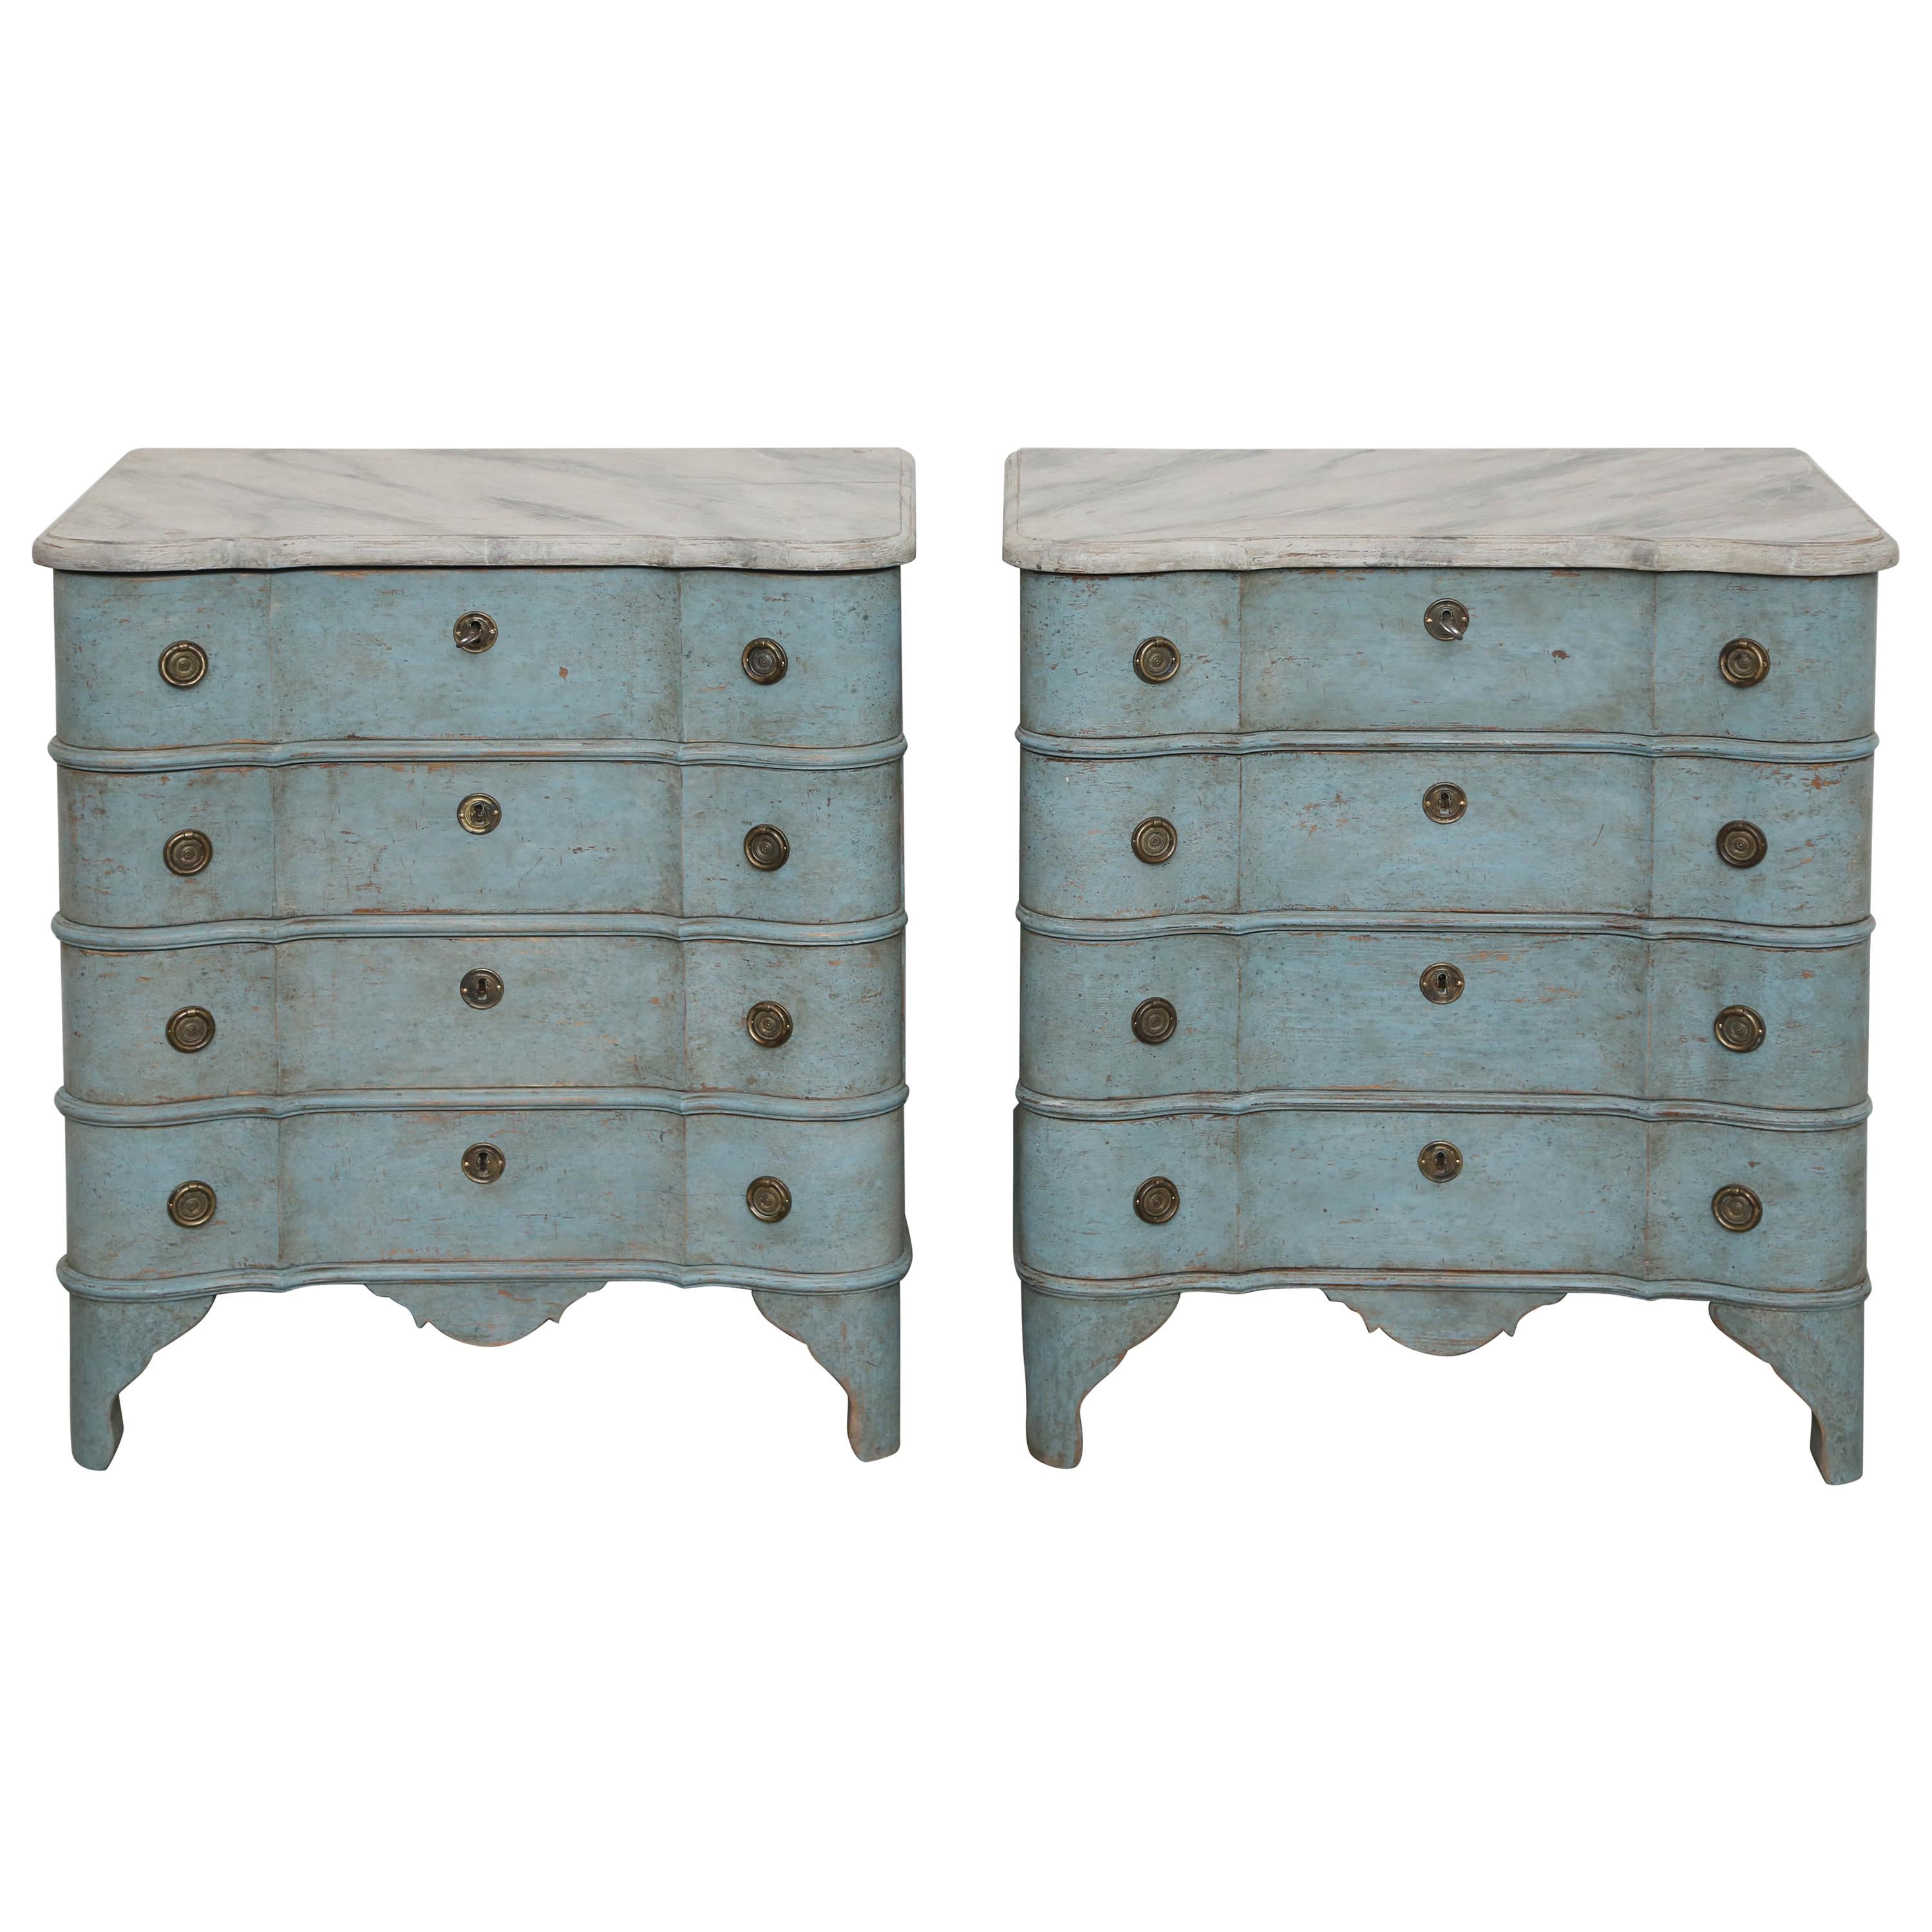 Pair of Antique Swedish Baroque Style Blue Painted Chests, Mid-19th Century